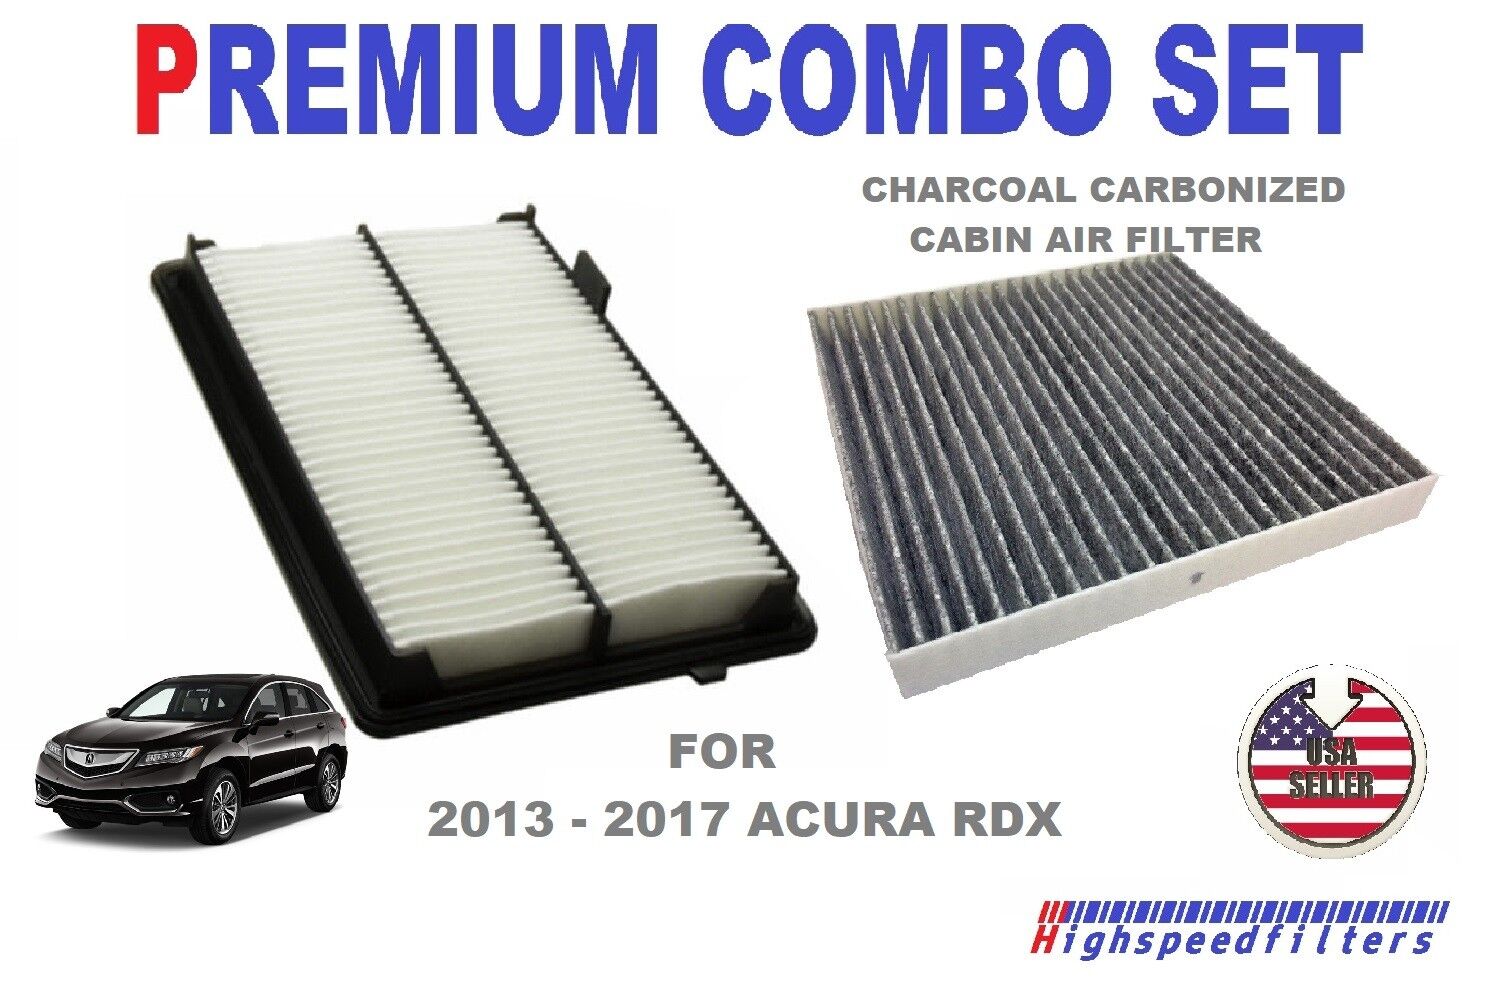 PREMIUM Engine Air Filter + CHARCOAL Cabin Filter for 2013 - 2018 ACURA RDX